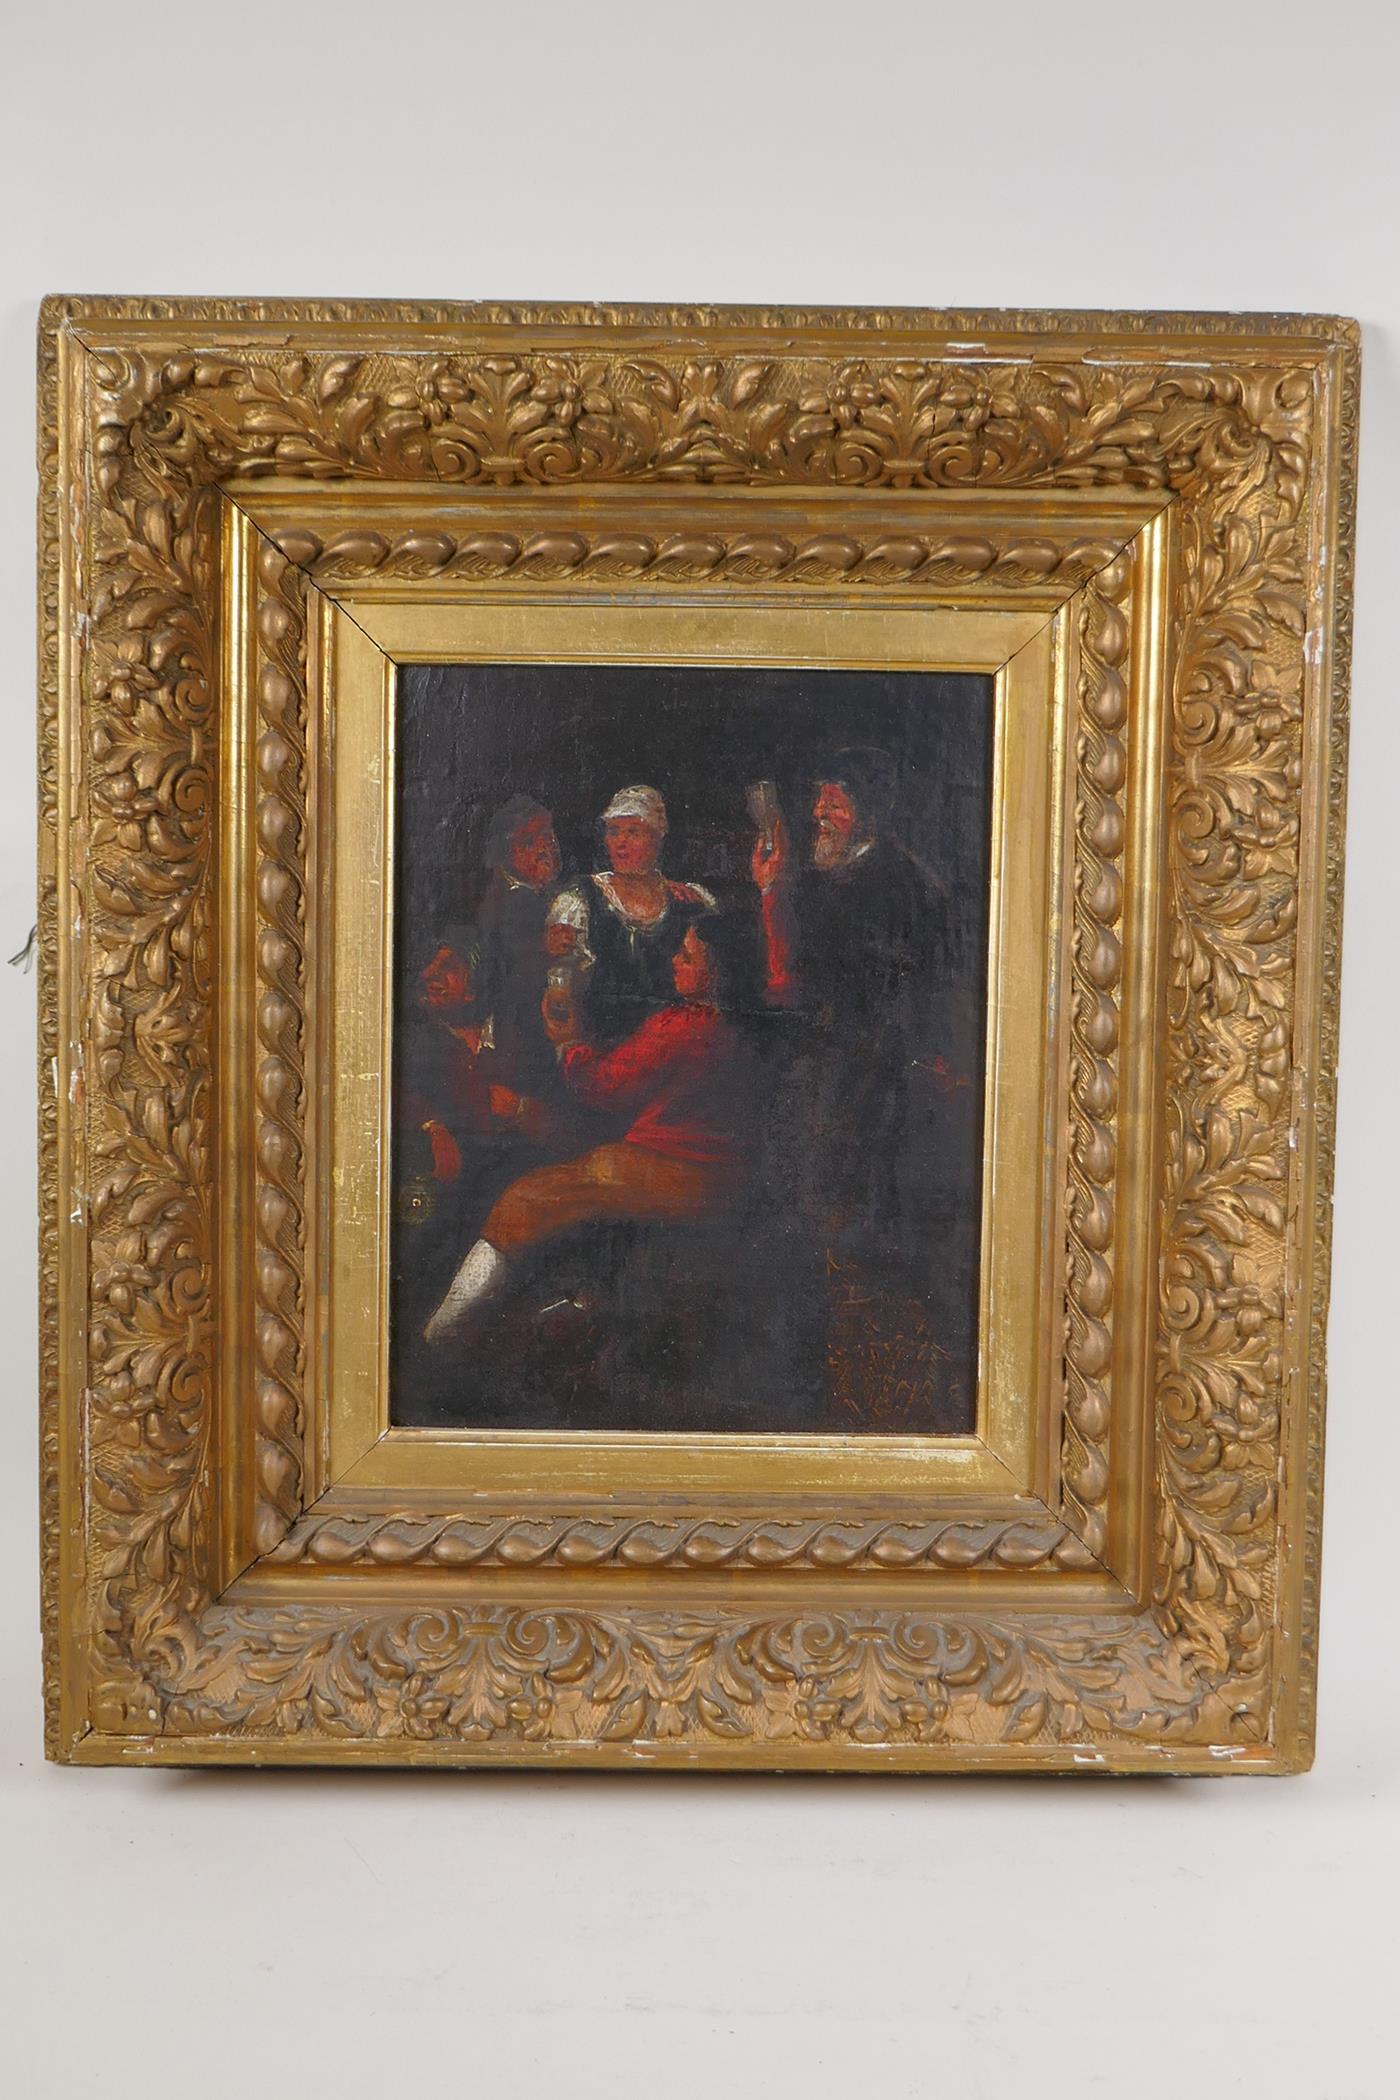 Revellers in an interior, late C18th, oil on canvas laid on board in heavy gilt frame, 10½"  x 8½" - Image 2 of 3